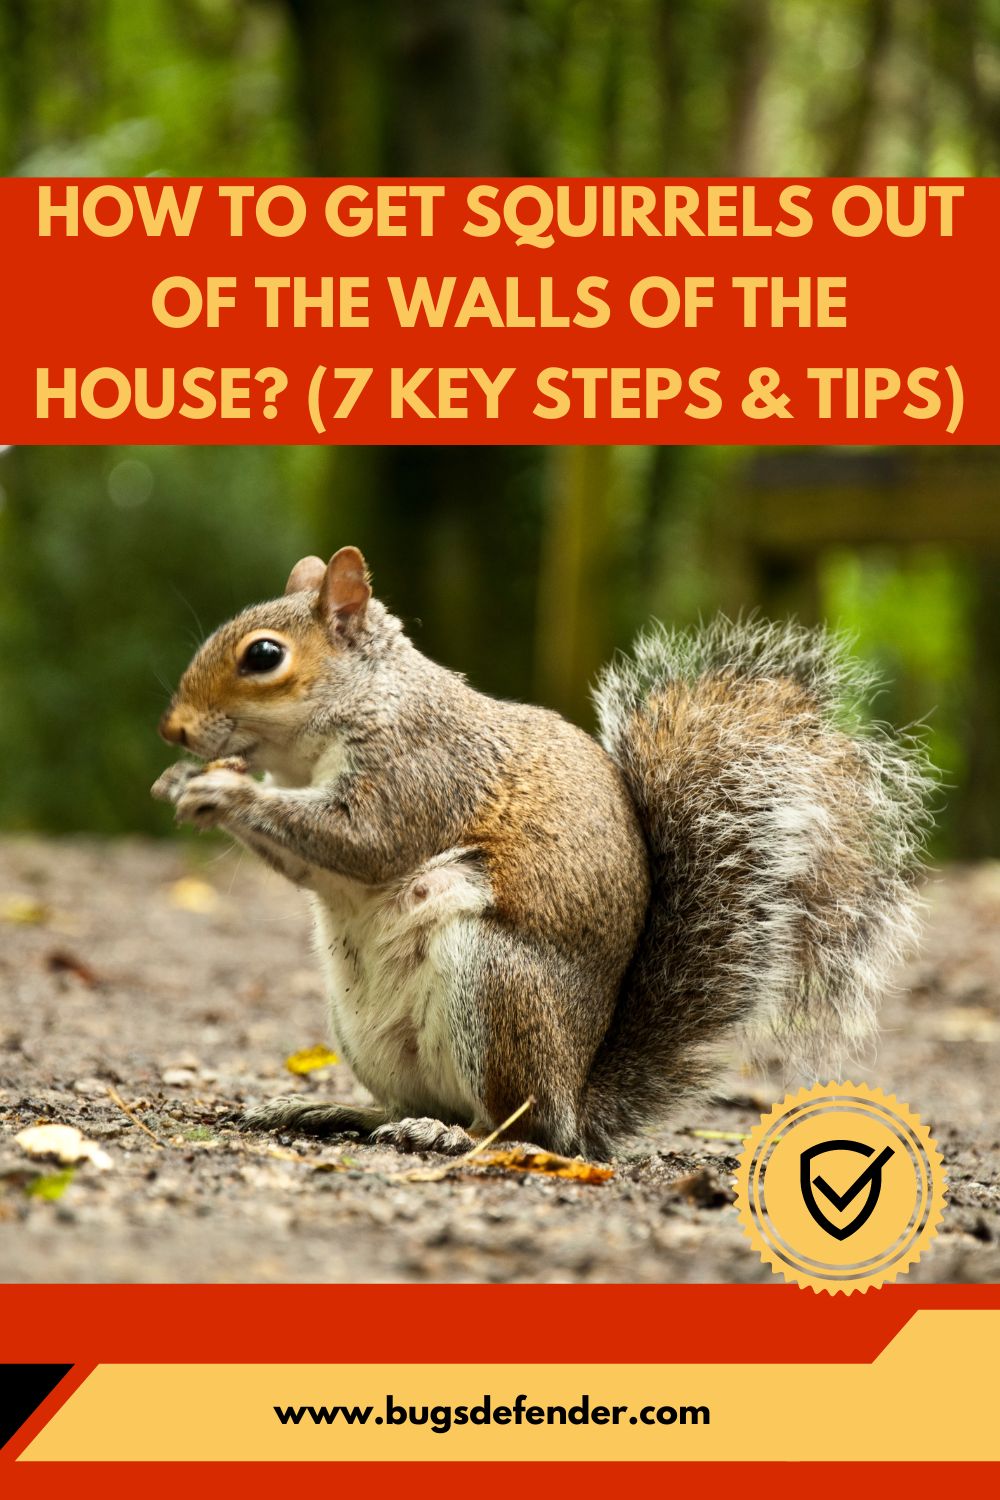 How To Get Squirrels Out of the Walls of the House? (7 Key Steps & Tips) pin 1